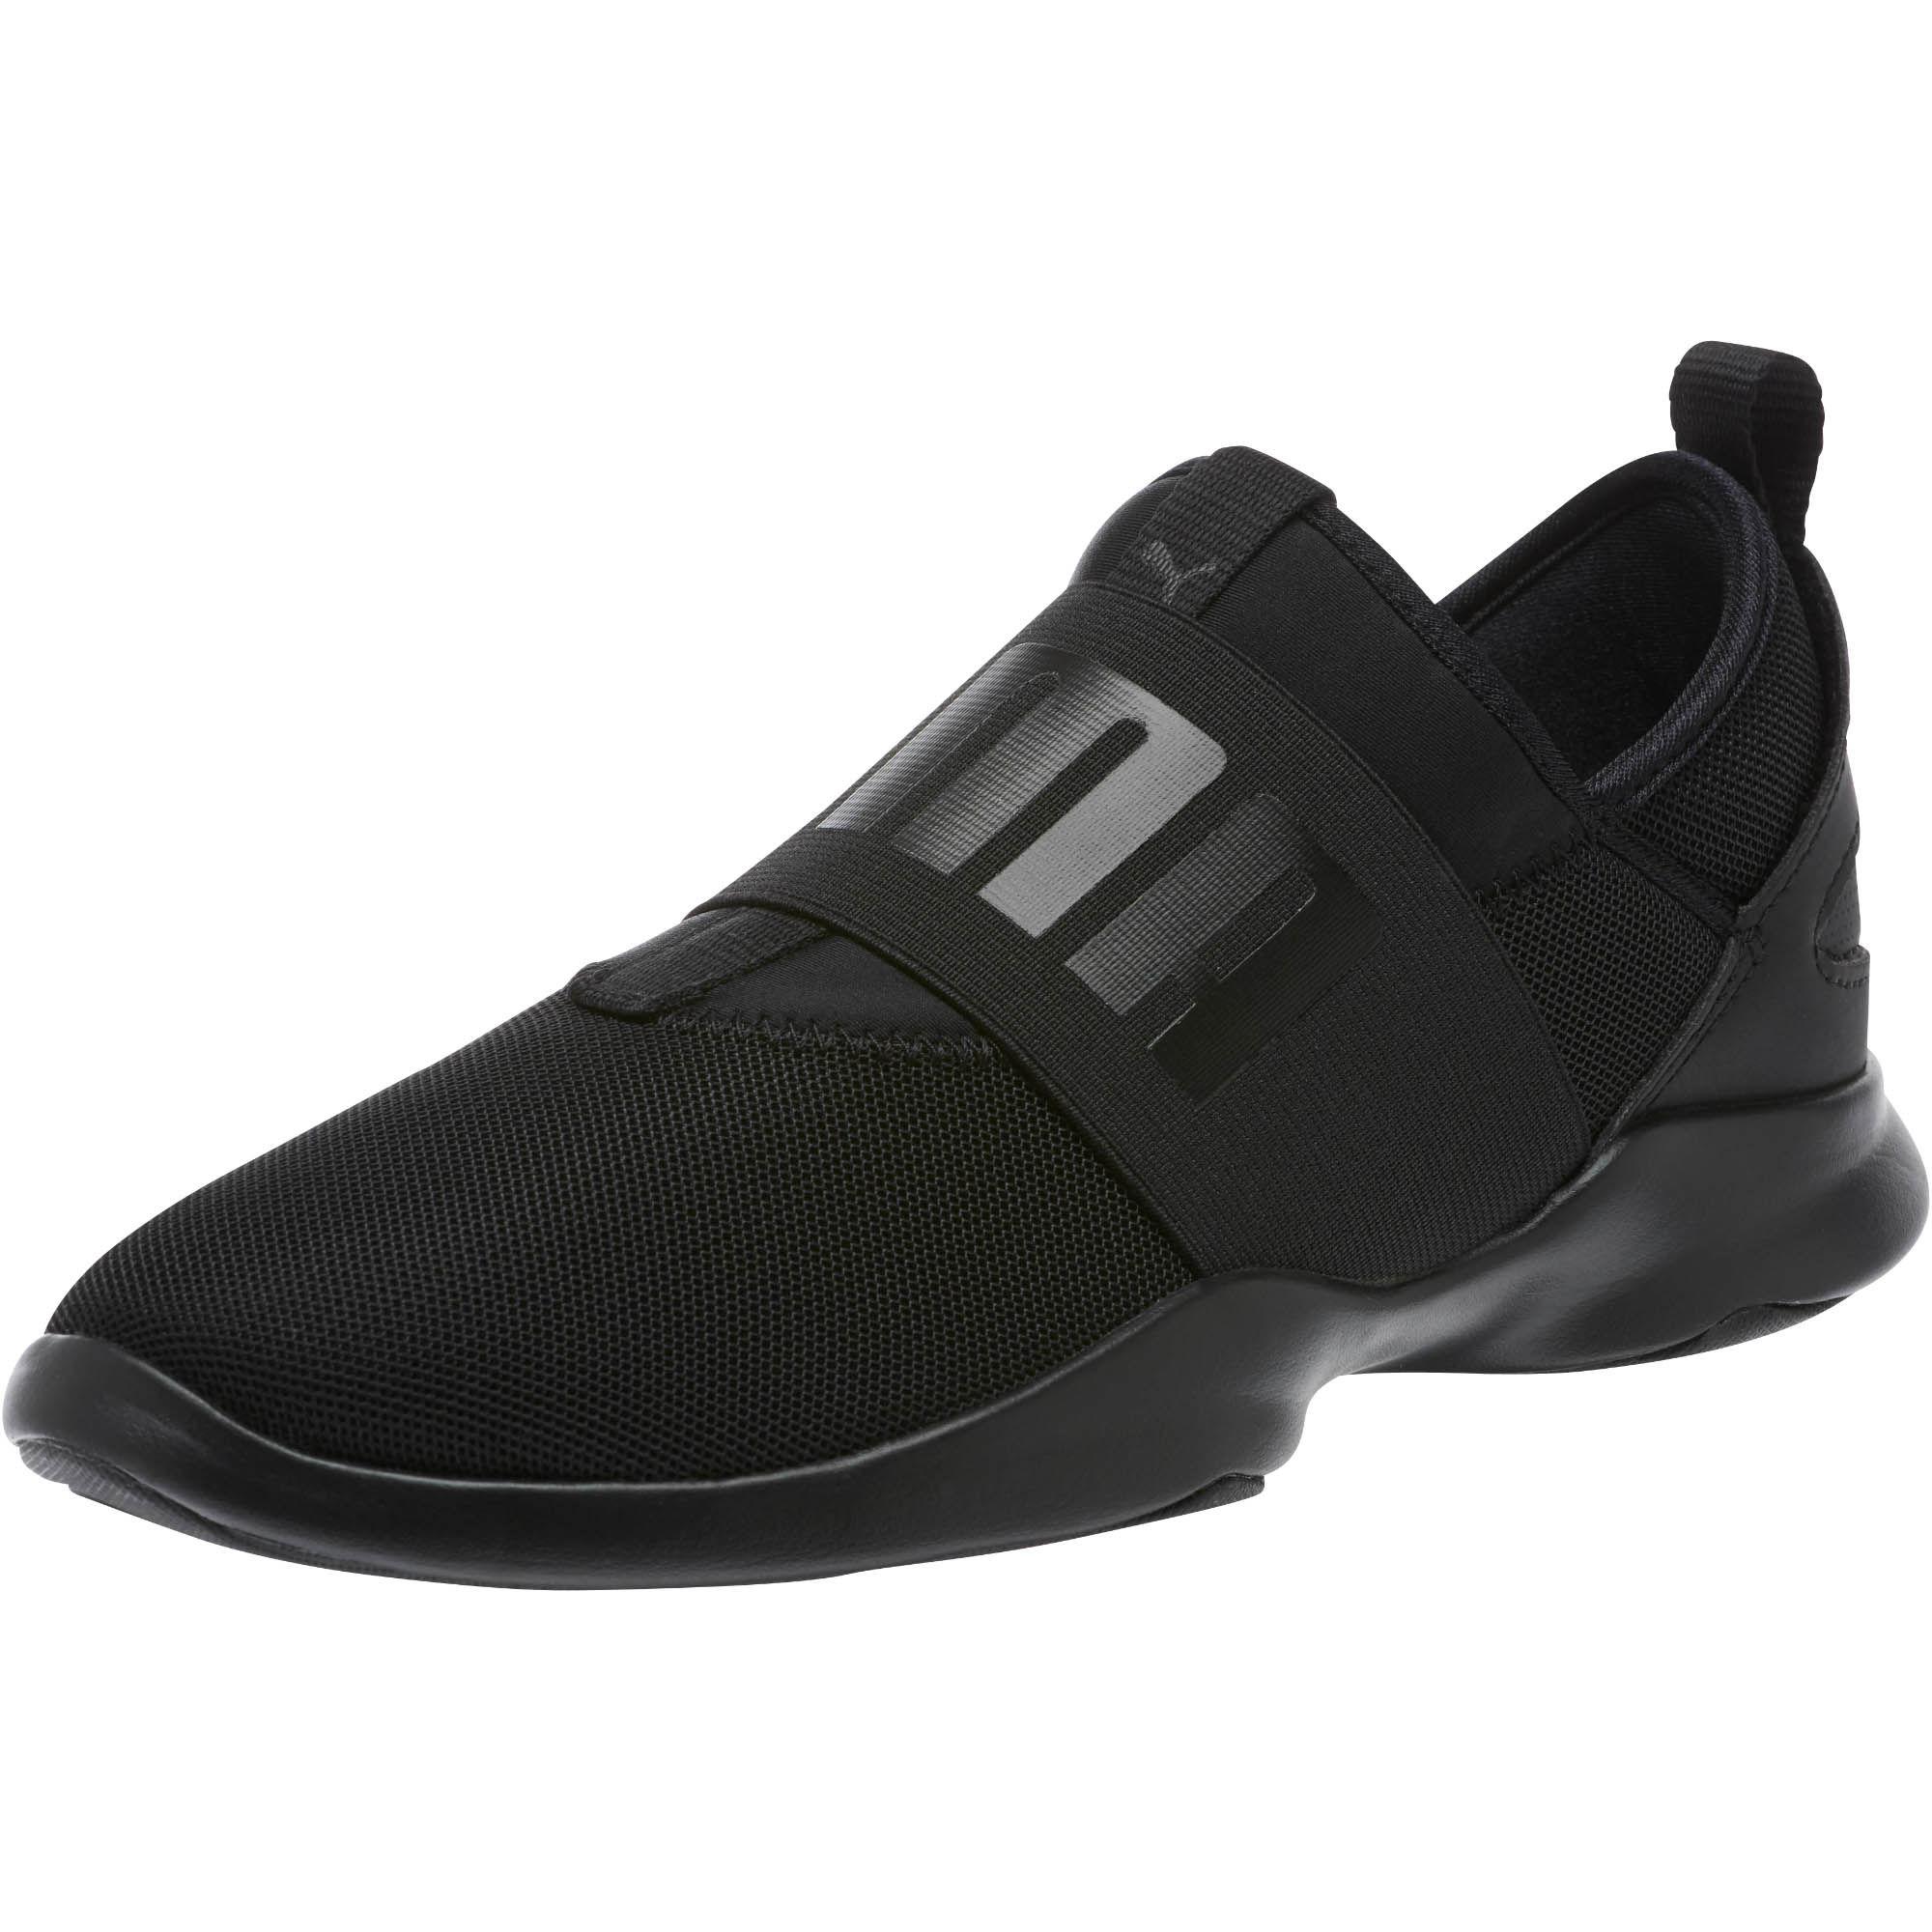 puma slip on sneakers,Save up to 15%,www.ilcascinone.com